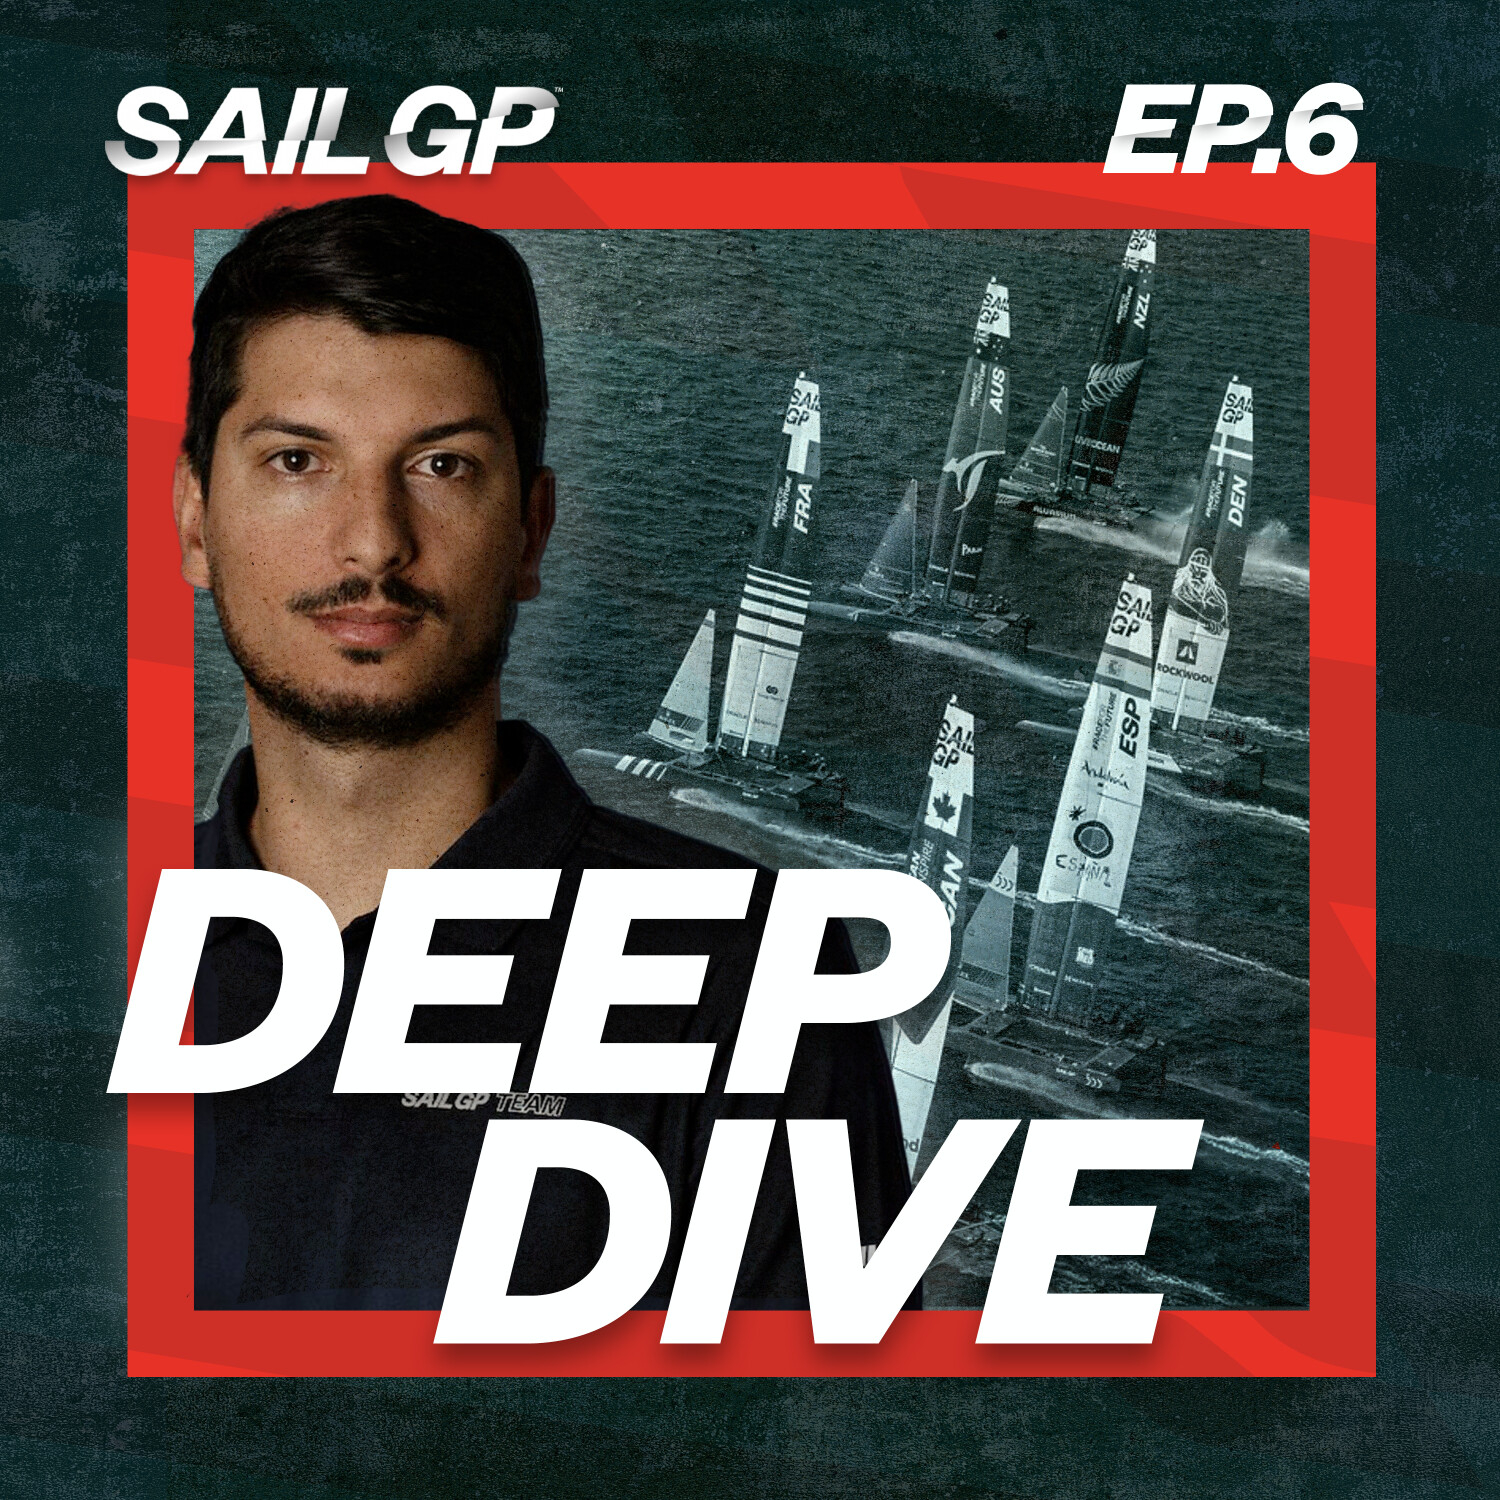 Digging into the data with SailGP’s Data Analyst, David Rey